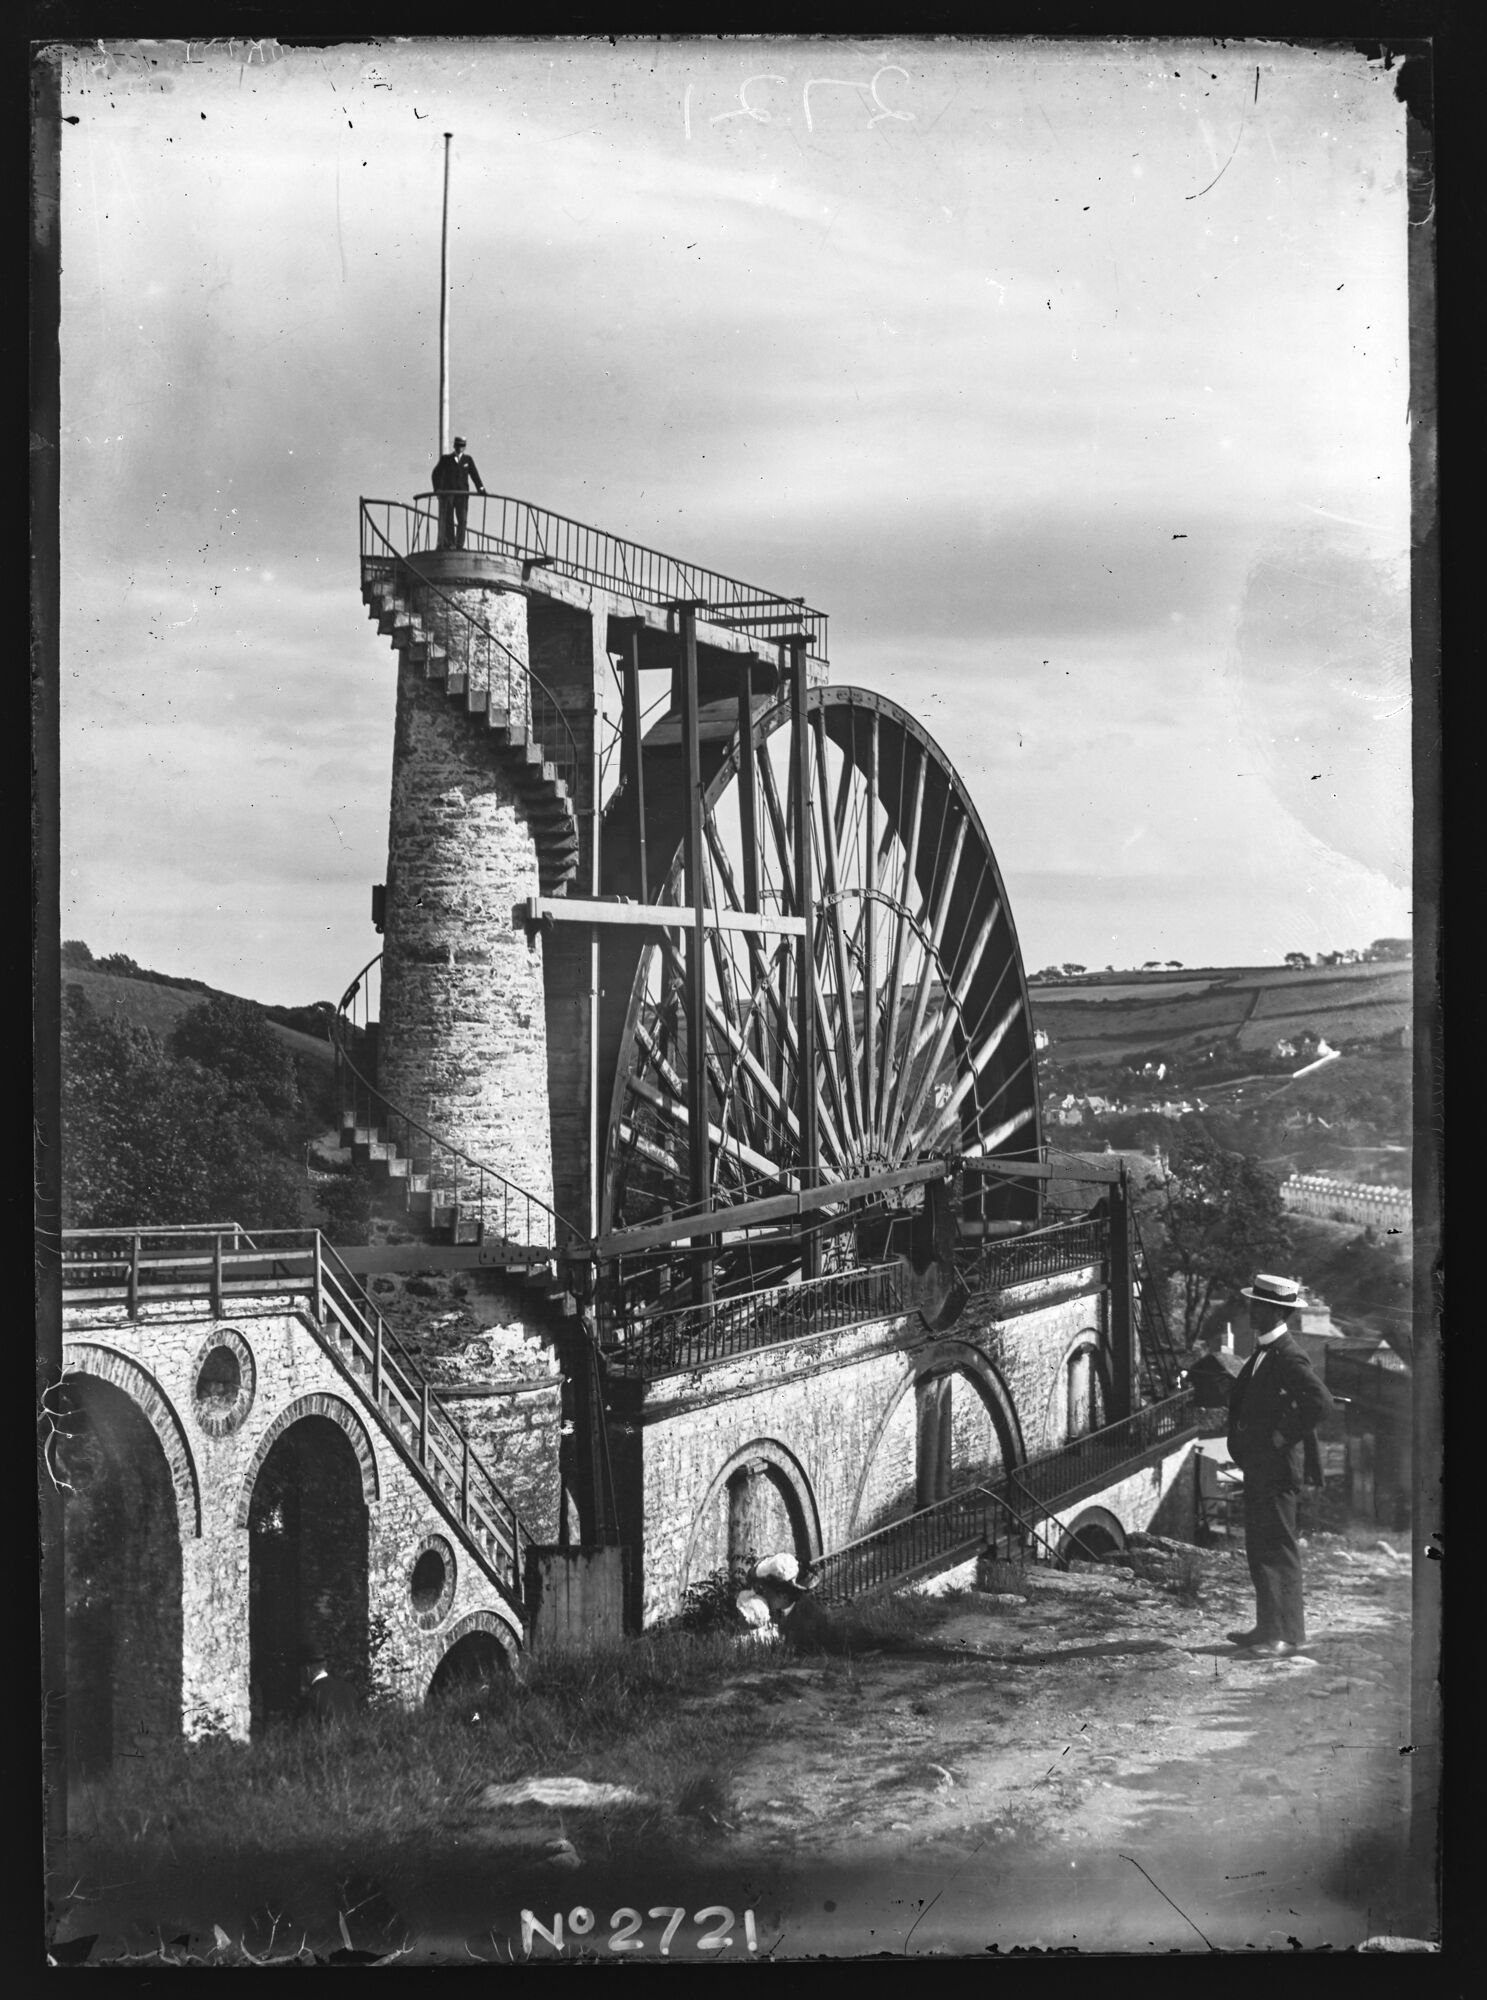 Laxey Wheel, Laxey, Isle Of Man